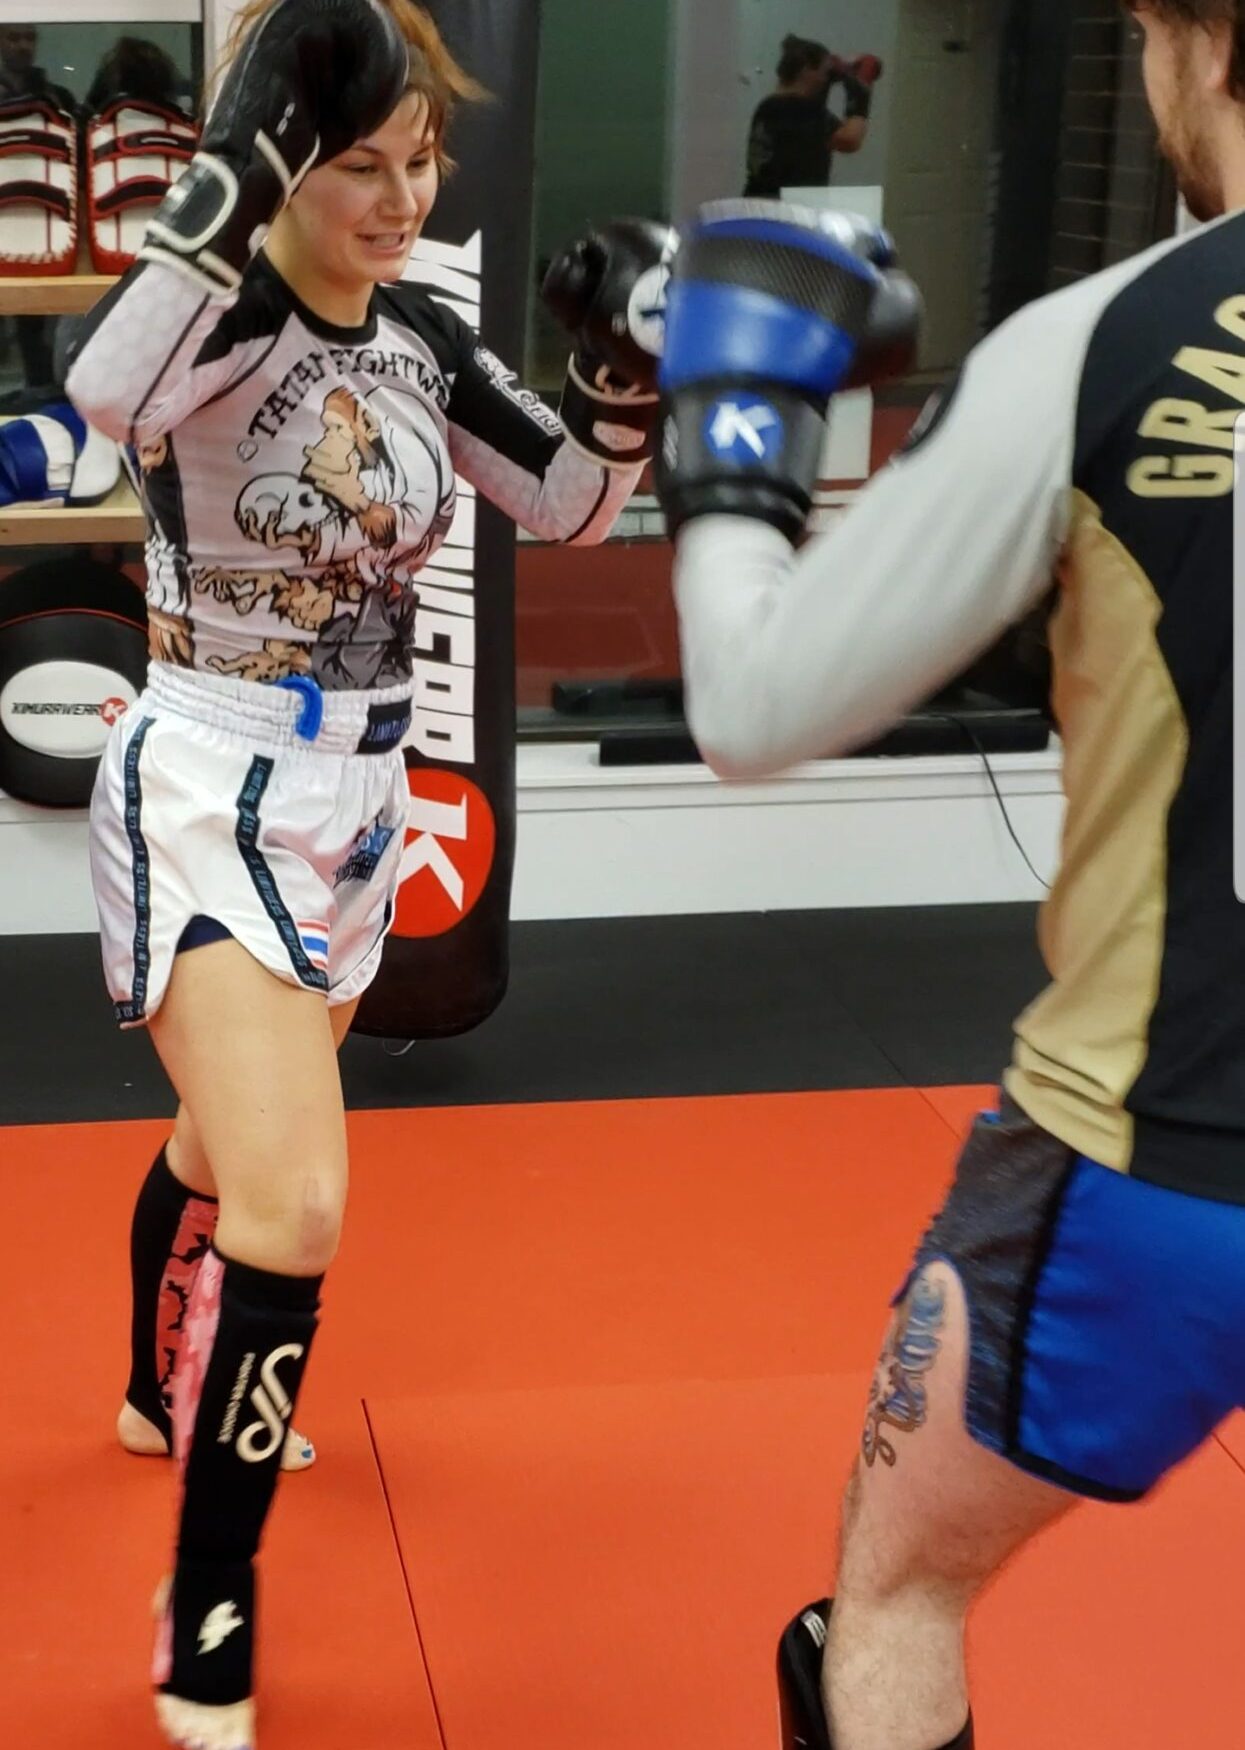 Adorable female Muay Thai fighter training in a small rashguard and traditional Thai shorts at Infinite Martial Arts & Fitness, pushing herself to be the best version of herself.